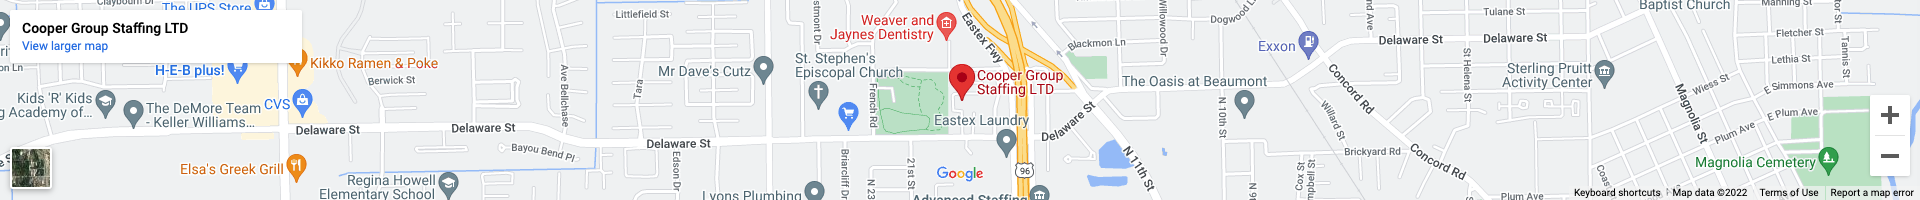 Cooper Group Staffing